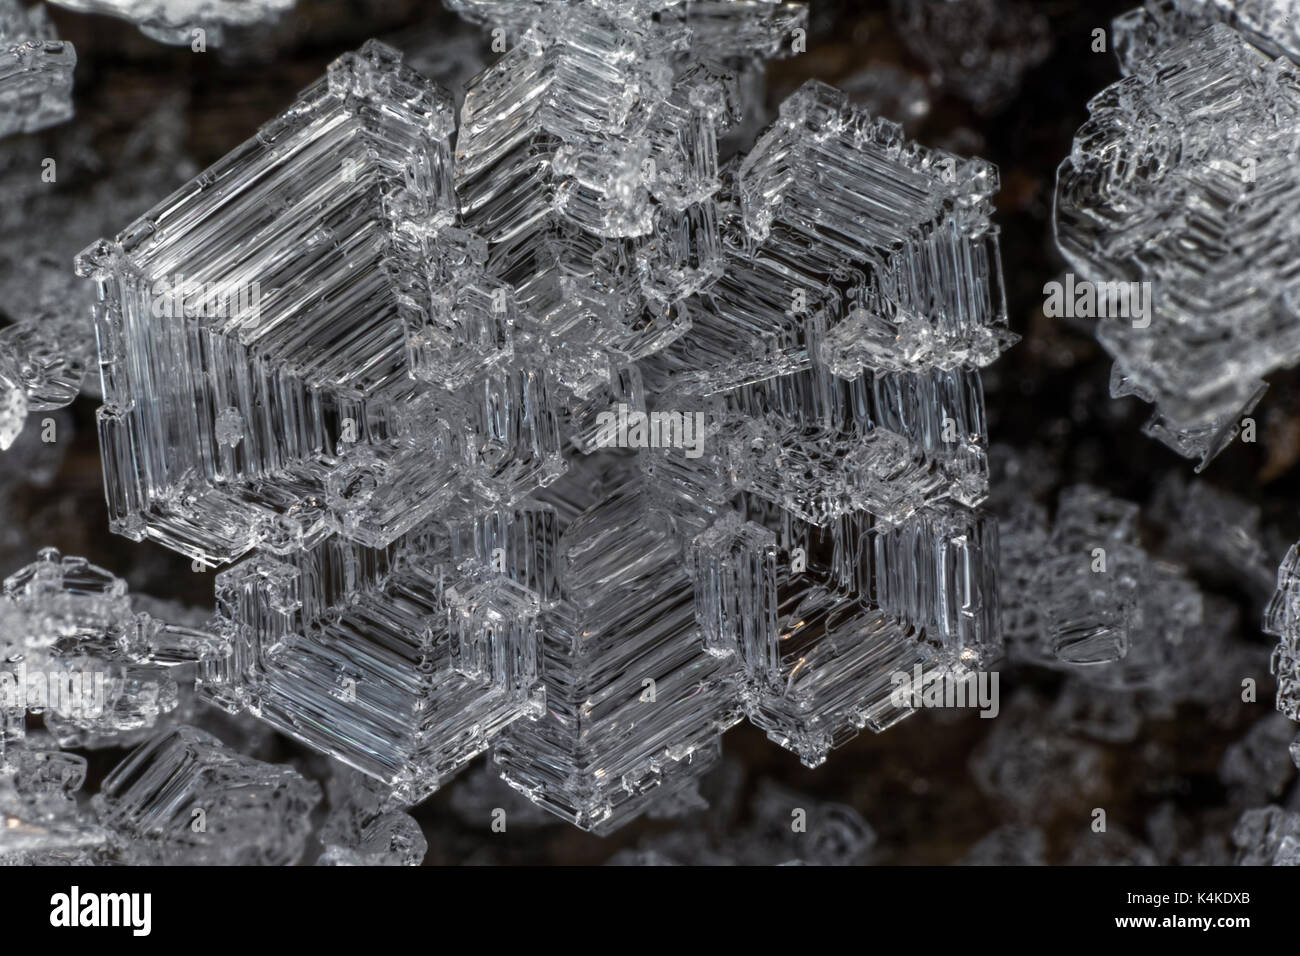 Ice crystal, structure, black and white image Stock Photo